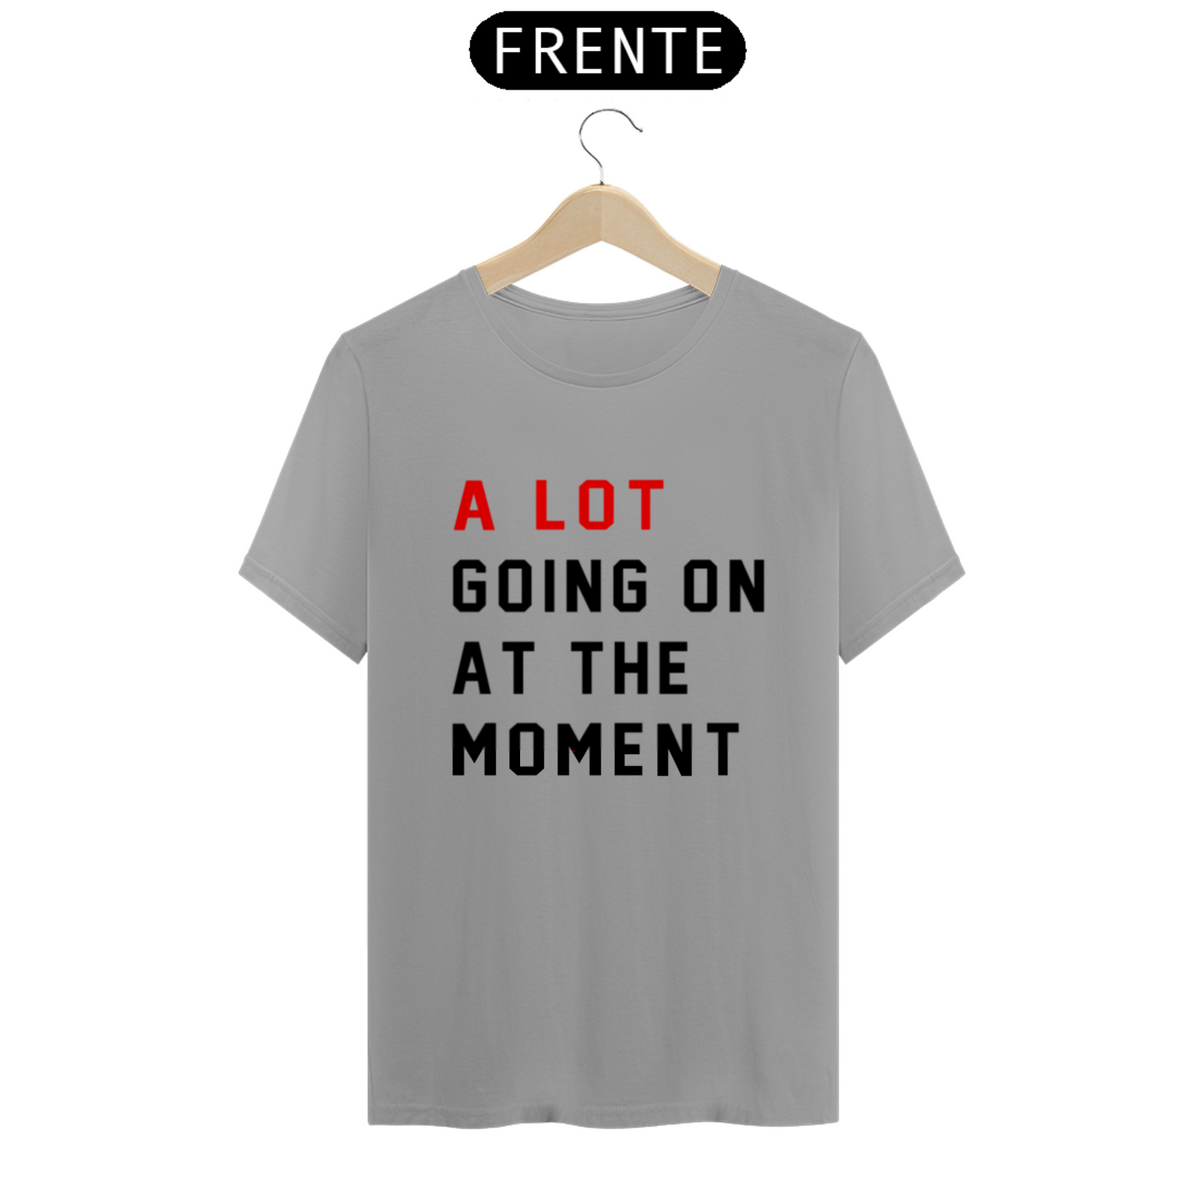 Nome do produtoCamiseta A lot going at the moment - Taylor Swift